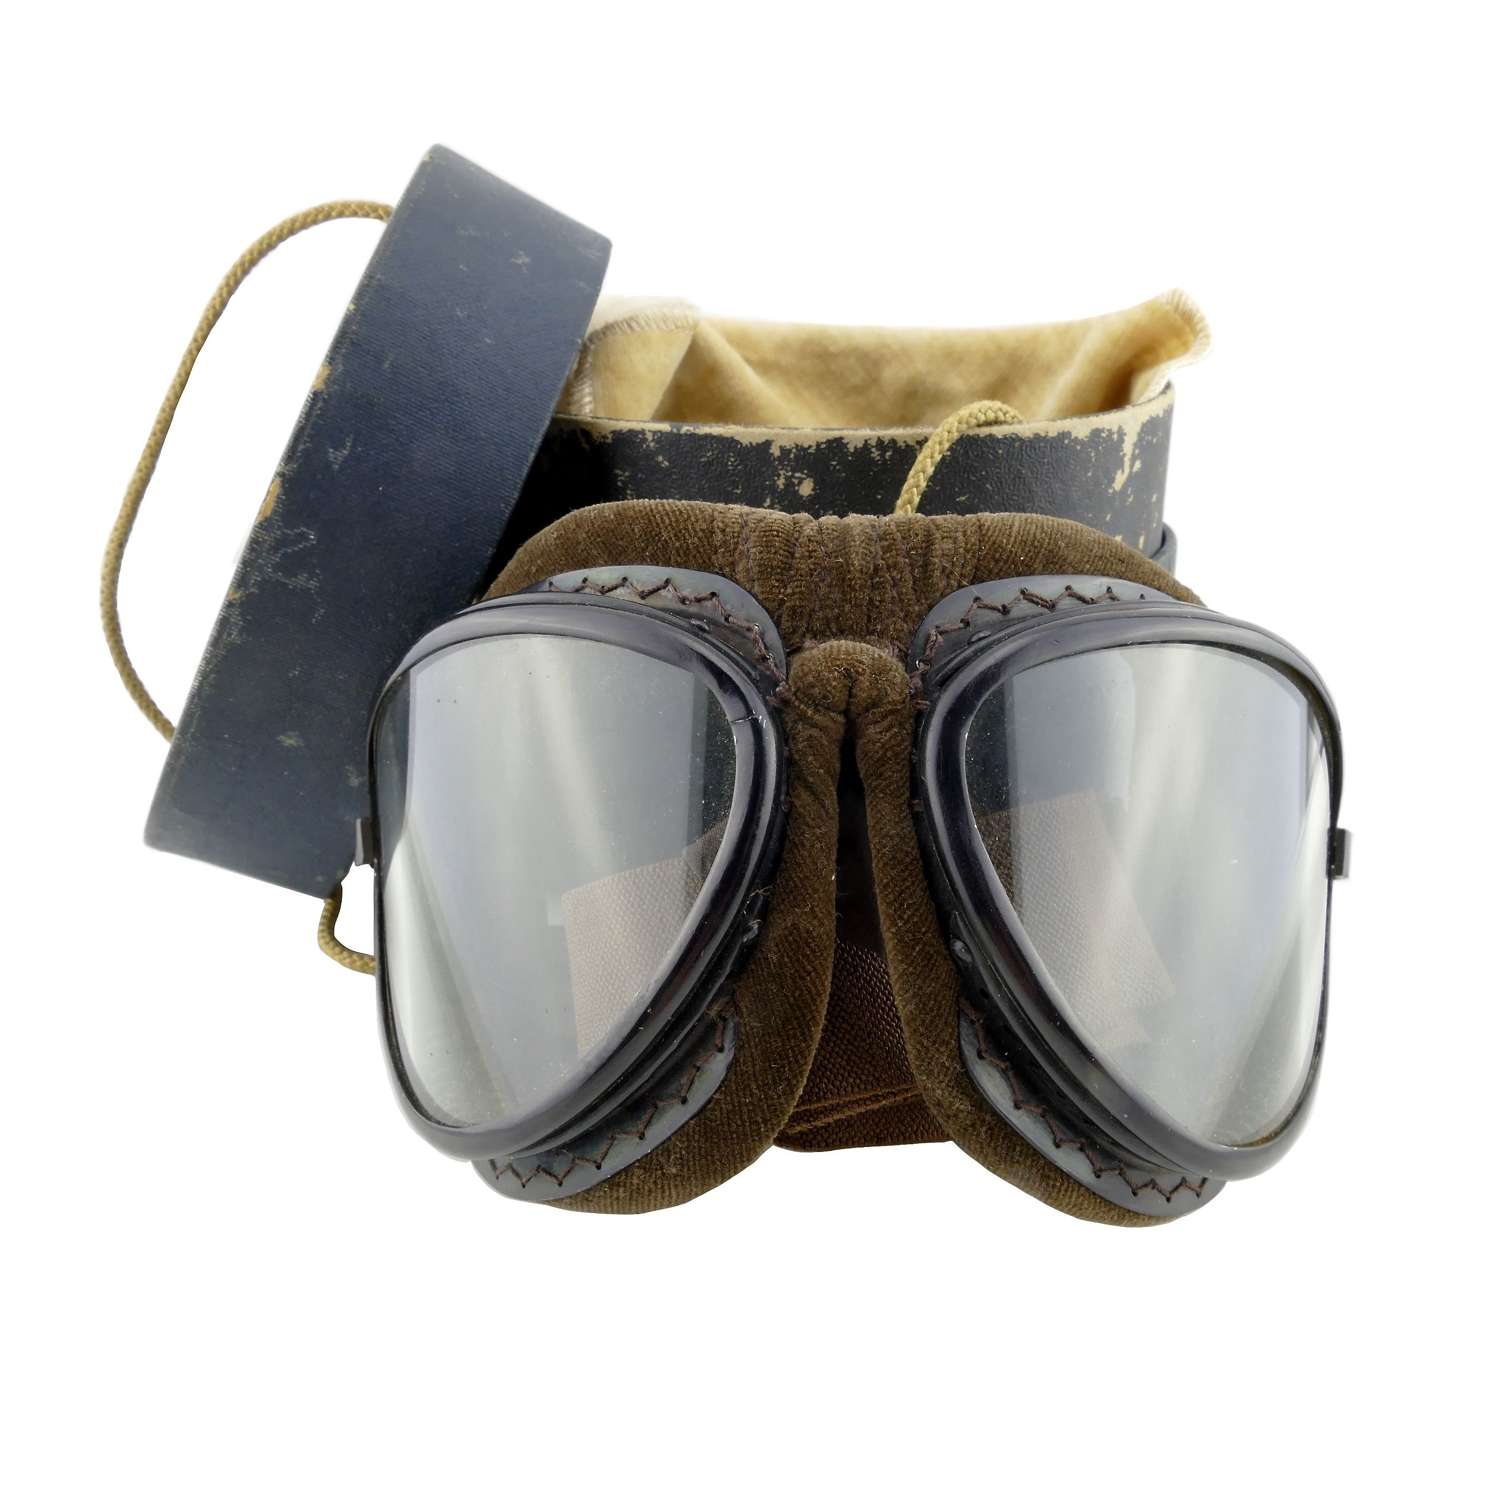 Japanese flying goggles, cased